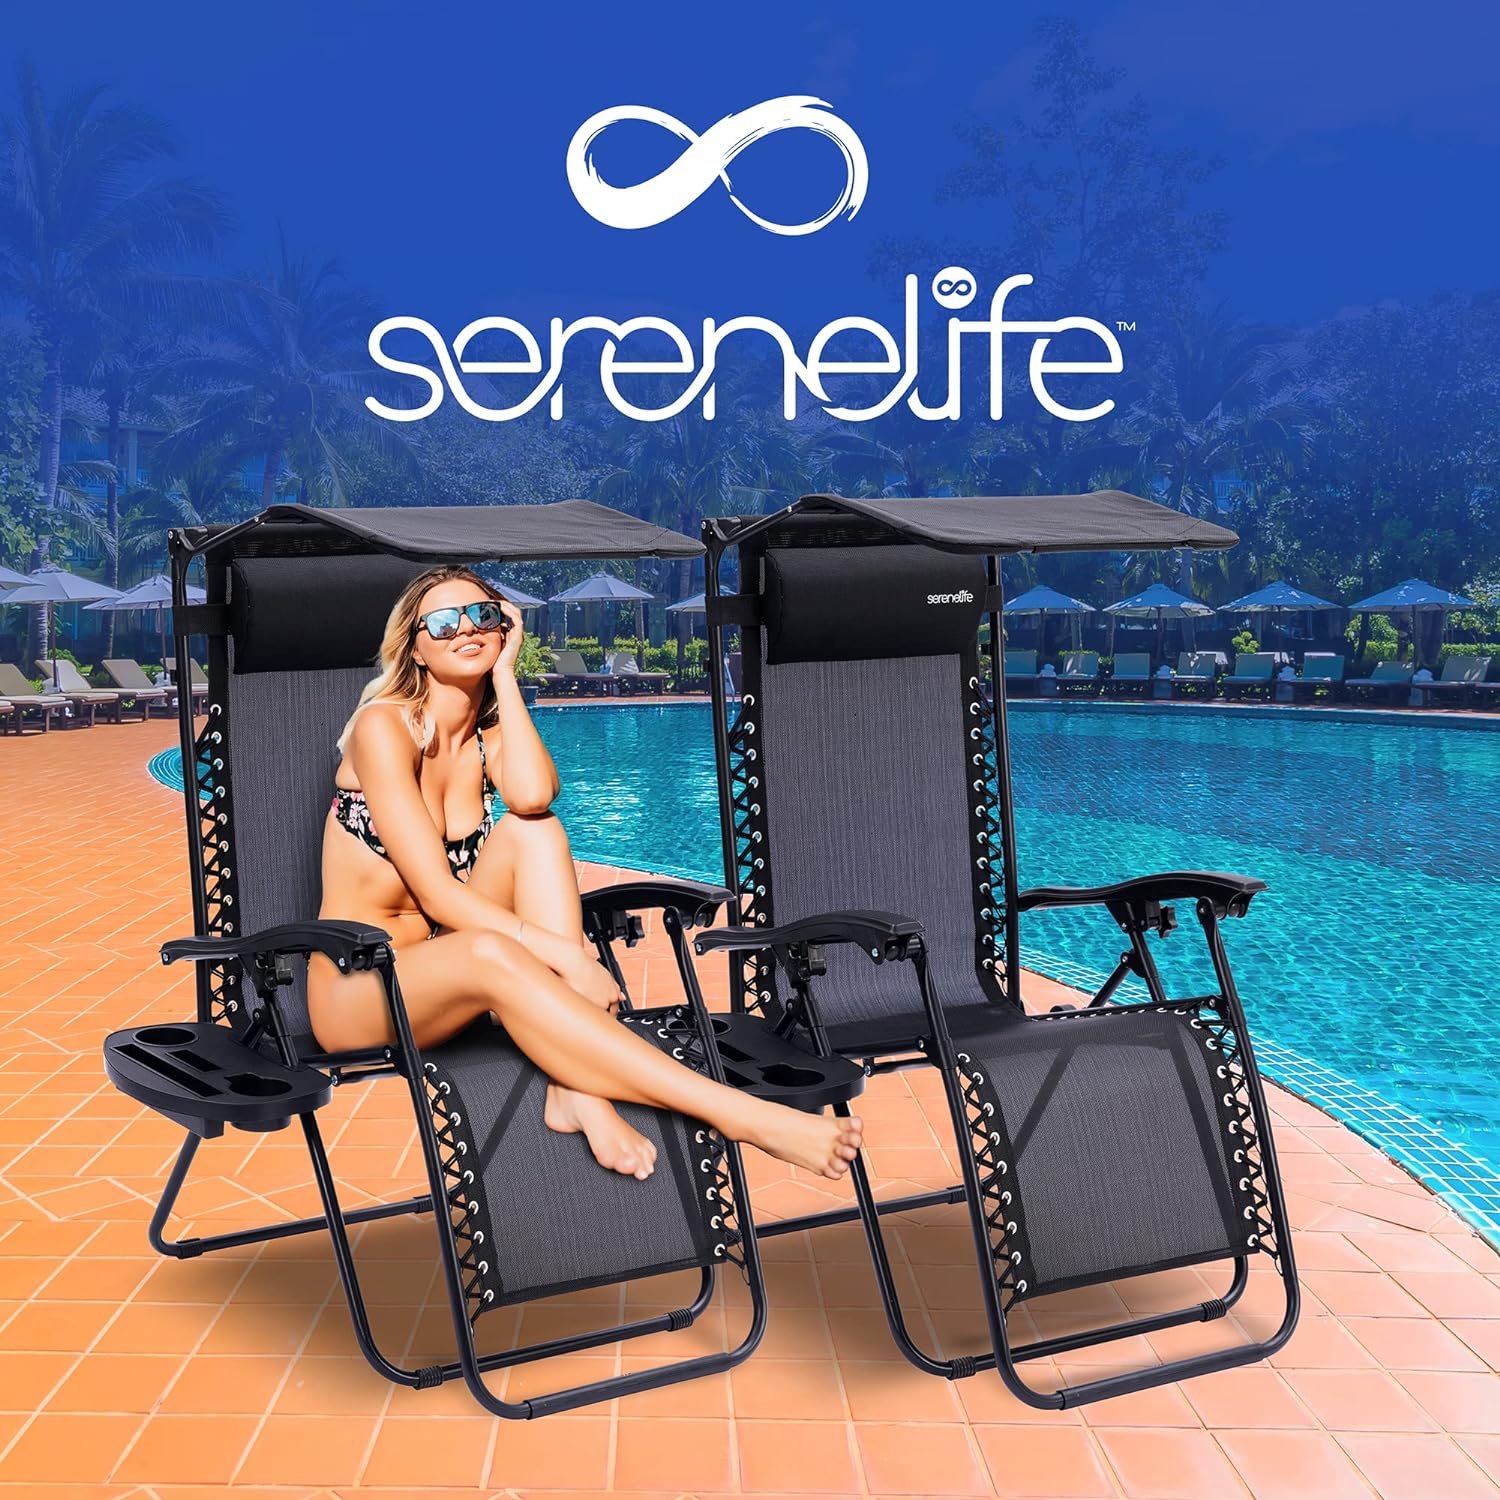 SereneLifeHome Zero Gravity Lounge Chair Review